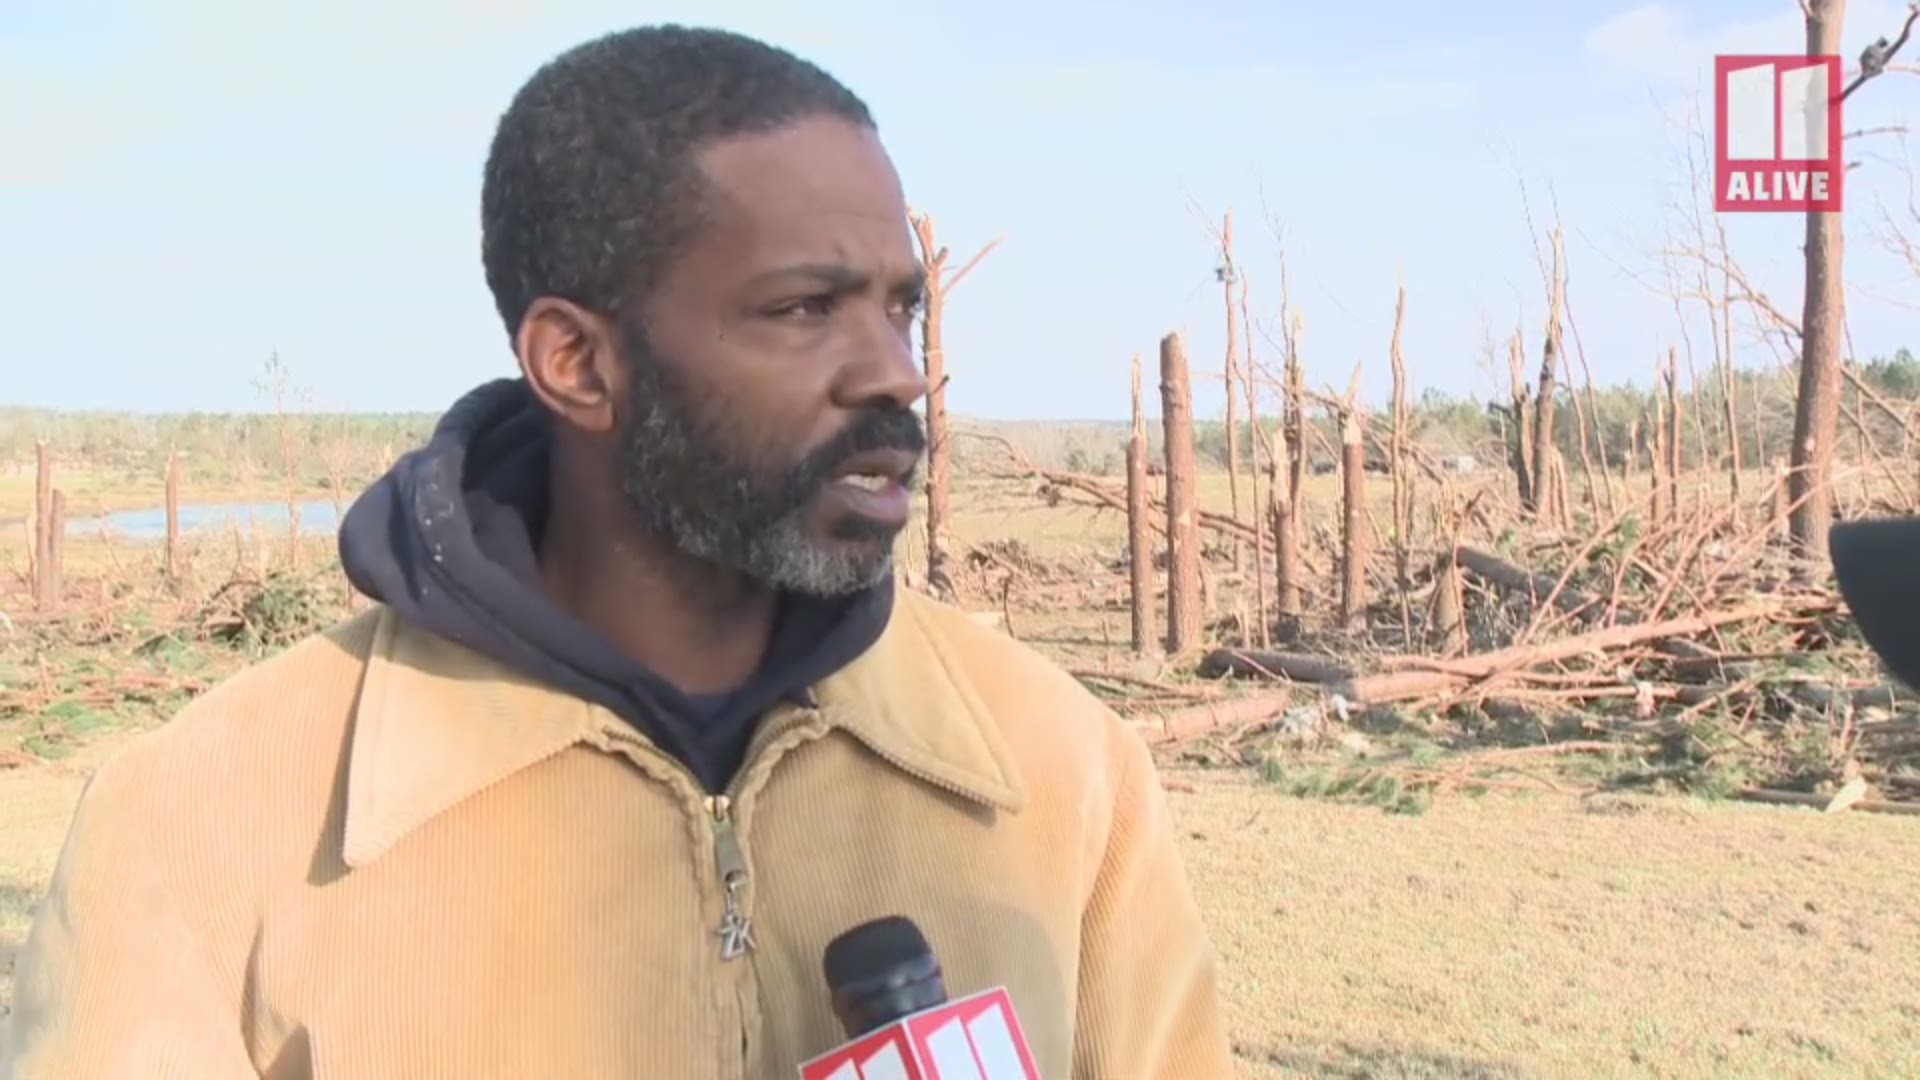 Curvin Robinson described the moments he had to ride out the powerful EF-4 tornado - and the devastation it left in its path.